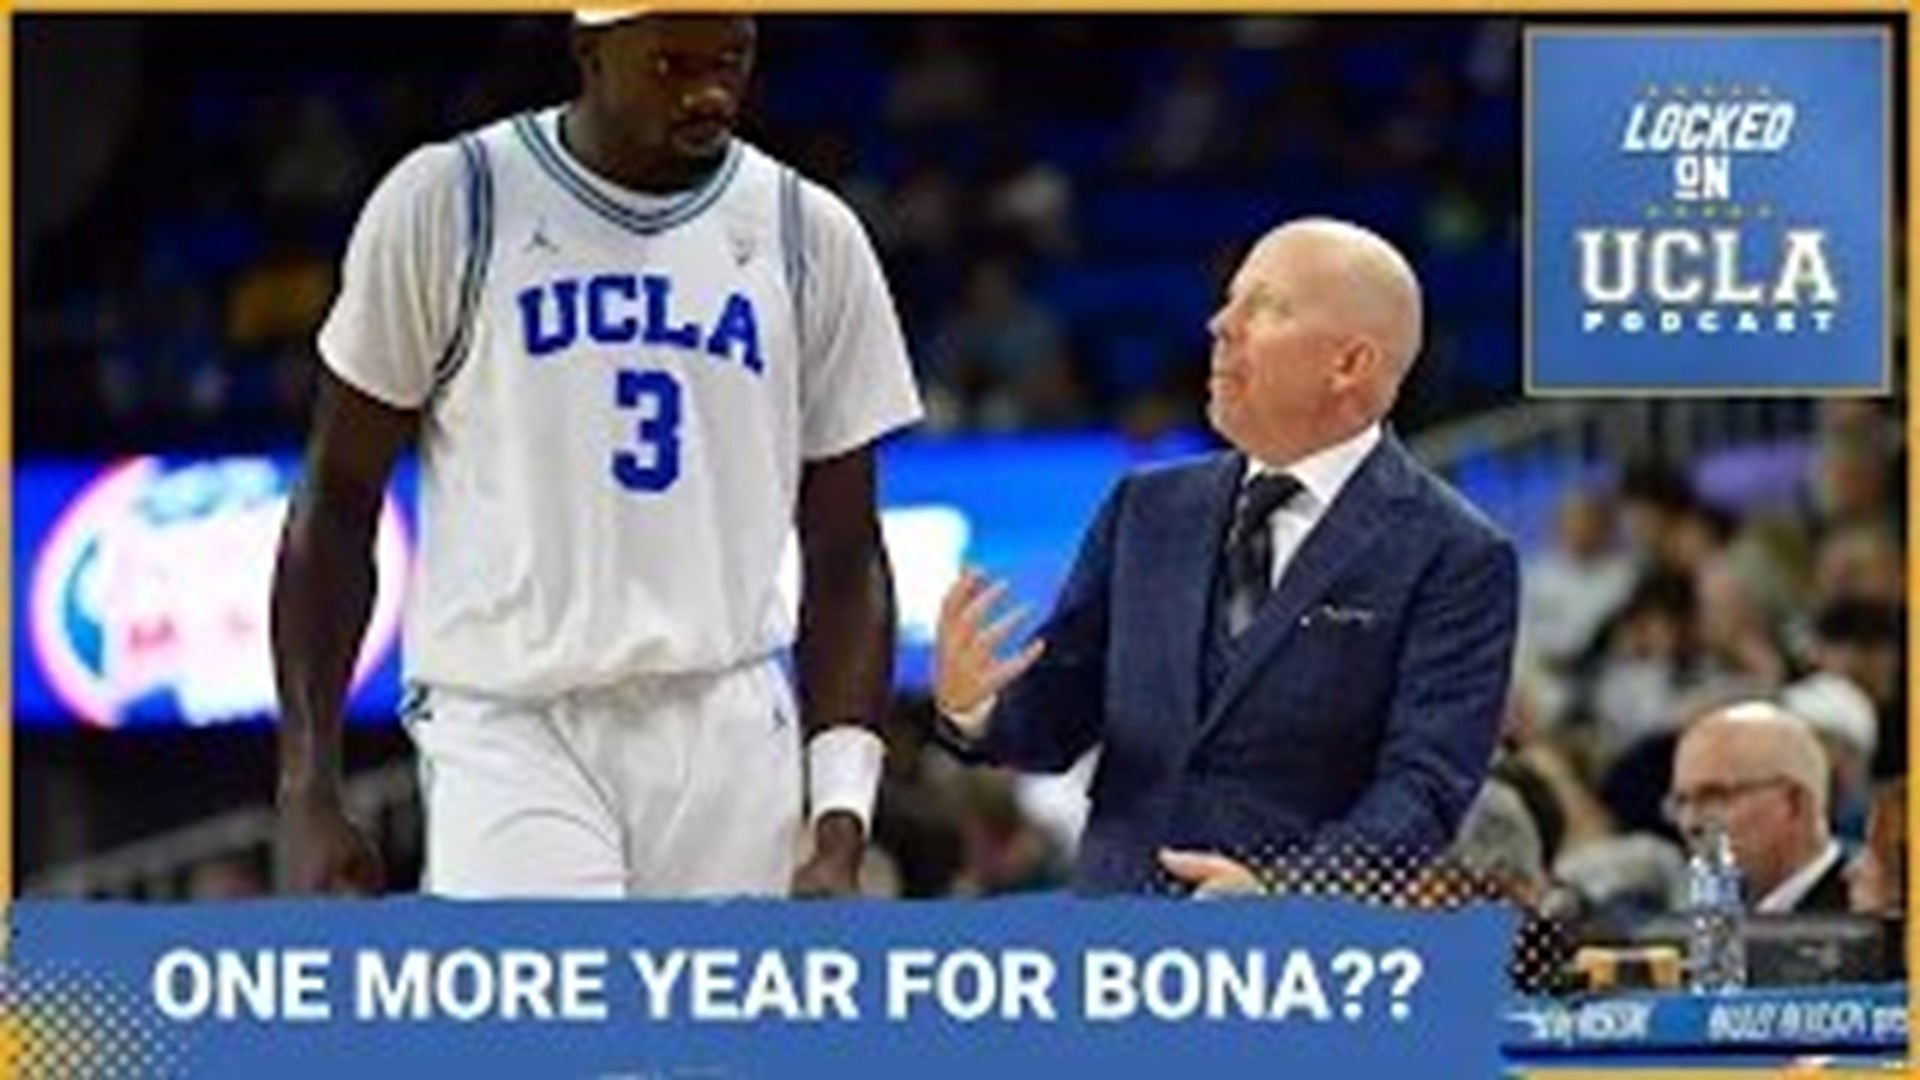 On this episode of Locked On UCLA, Zach Anderson-Yoxsimer discusses the reasons why UCLA Basketball & Mick Cronin one more year.